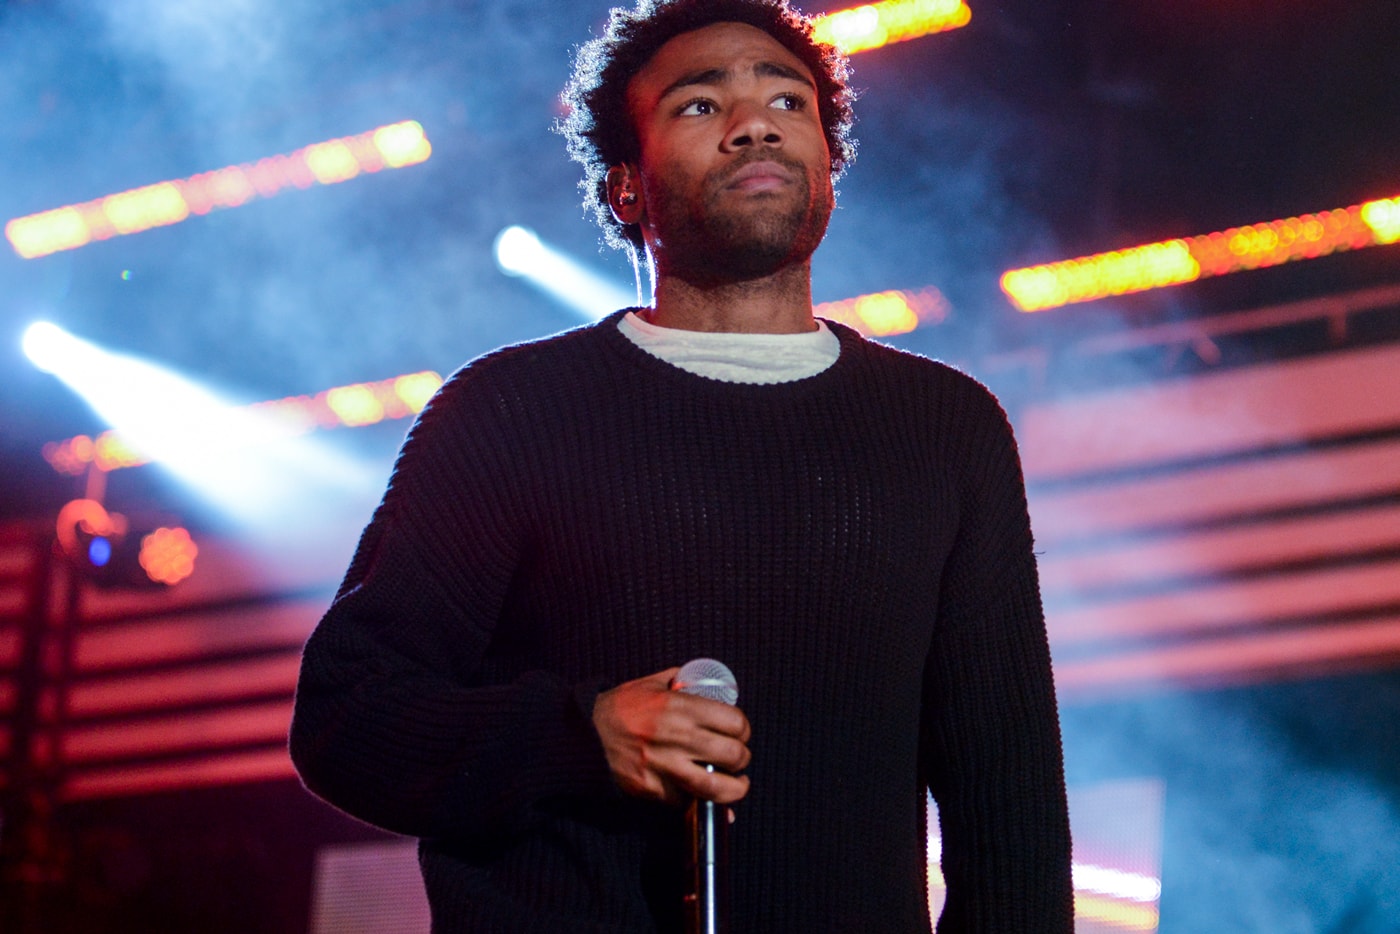 A New Childish Gambino Album Could Be in the Works